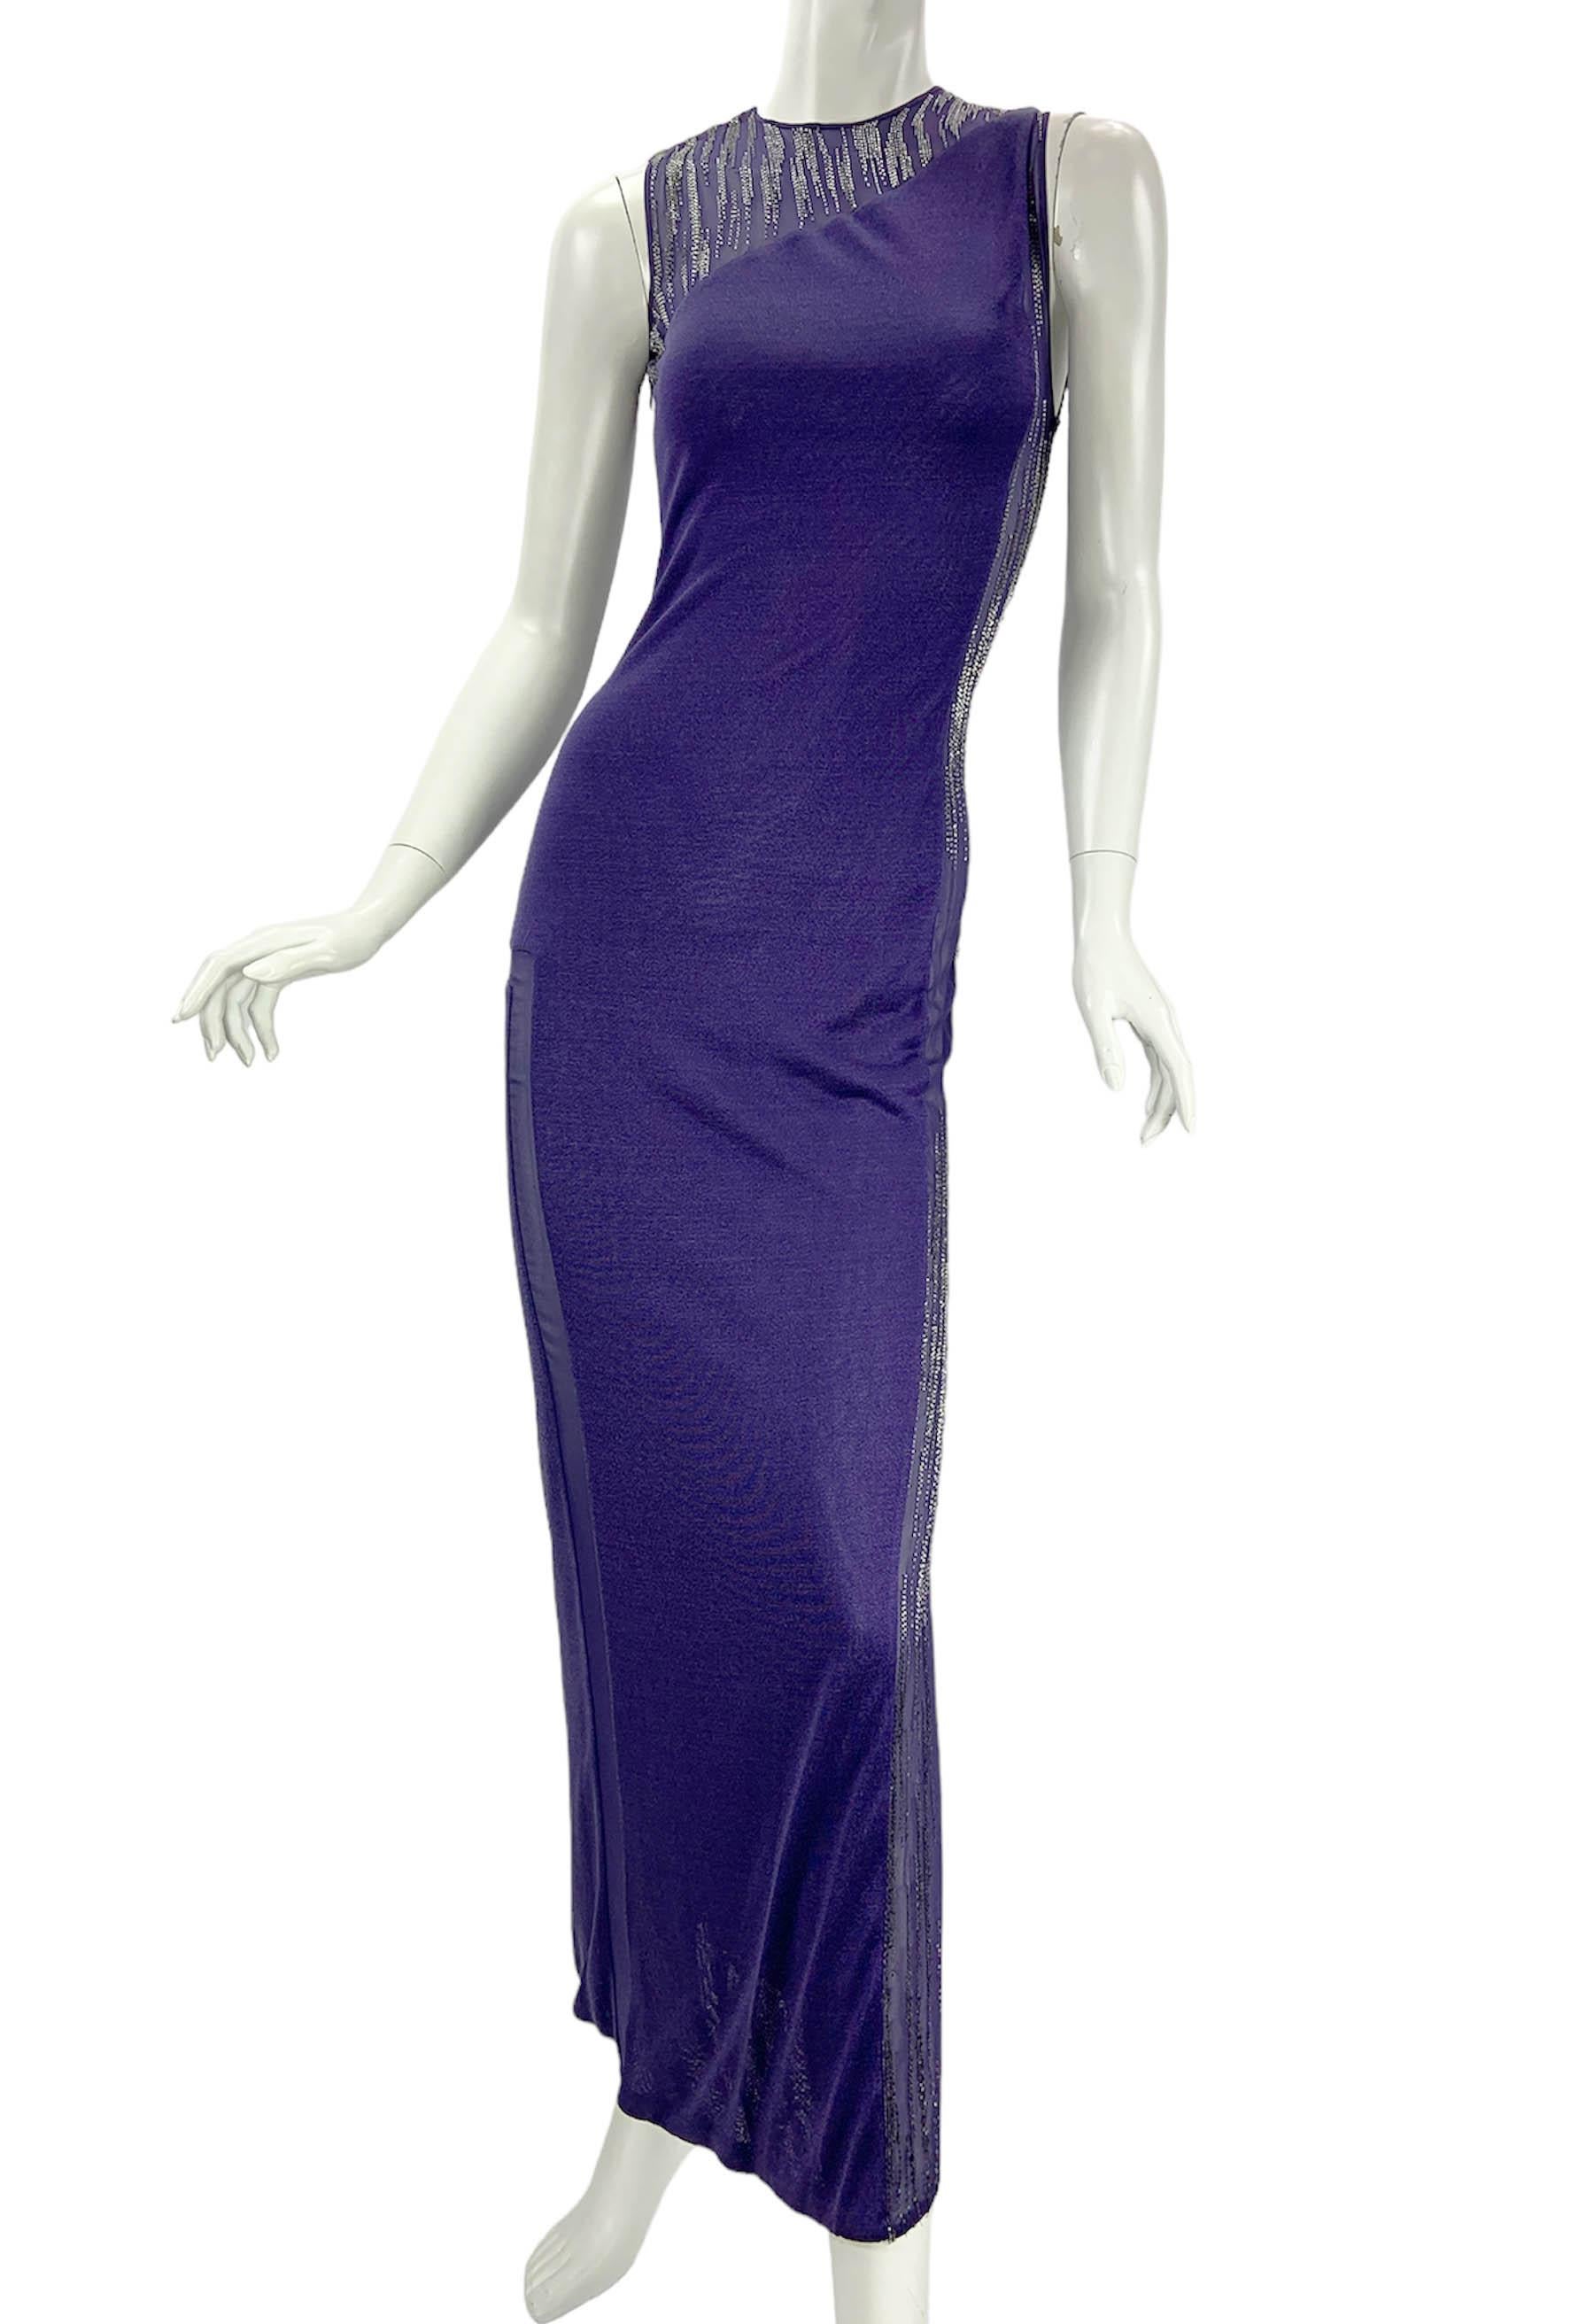 Vintage Versace Atelier Sheer Panels Embellished Dress
No size as it is a haute couture piece. Approx. S/XS.
Purple jersey, sexy sheer silk chiffon light purple panels with silver tone tube beads, lined in same jersey fabric, side zip closure,